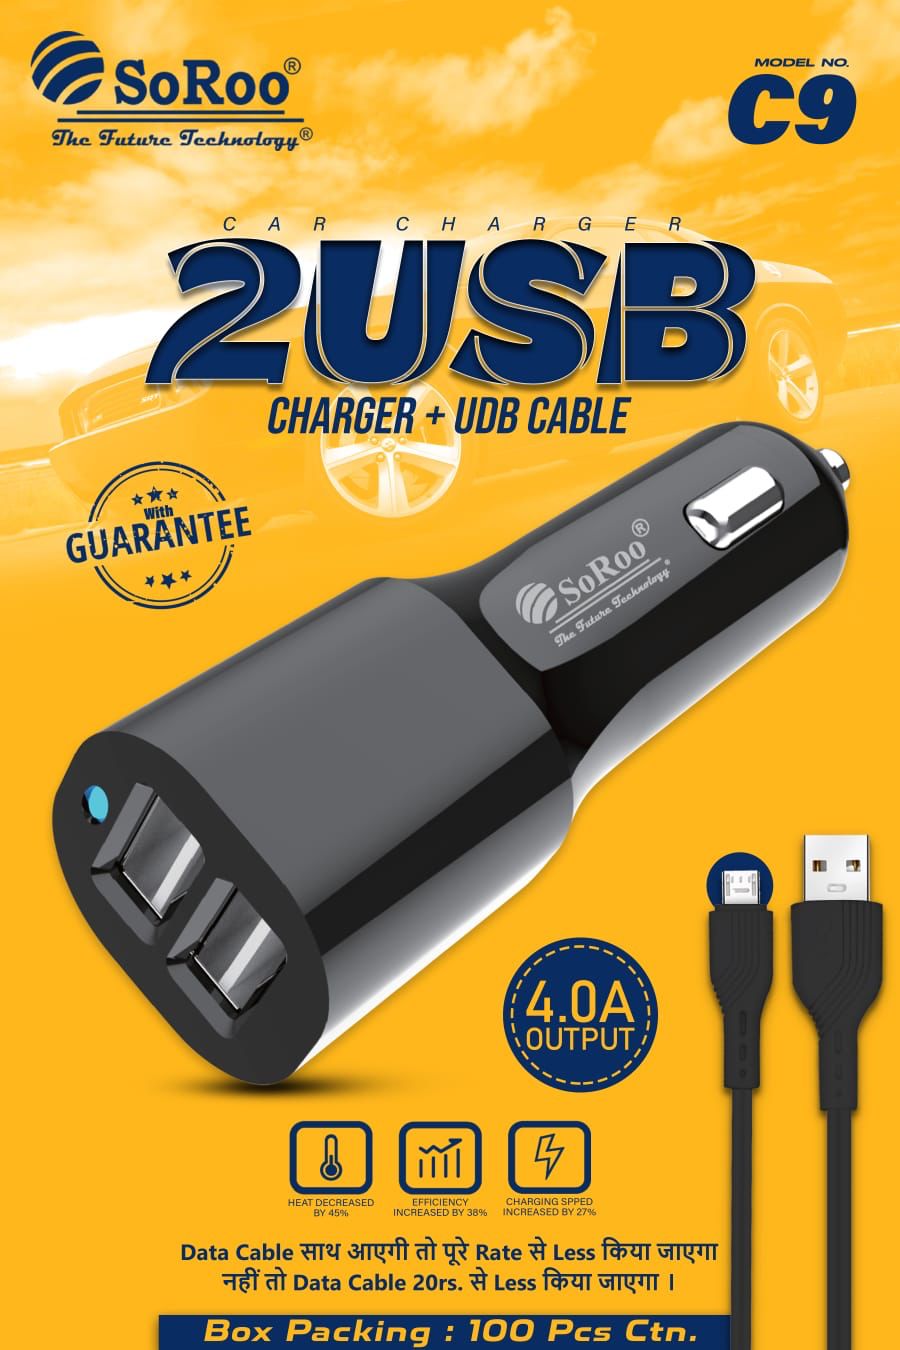 Soroo Car Mobile Charger C-9